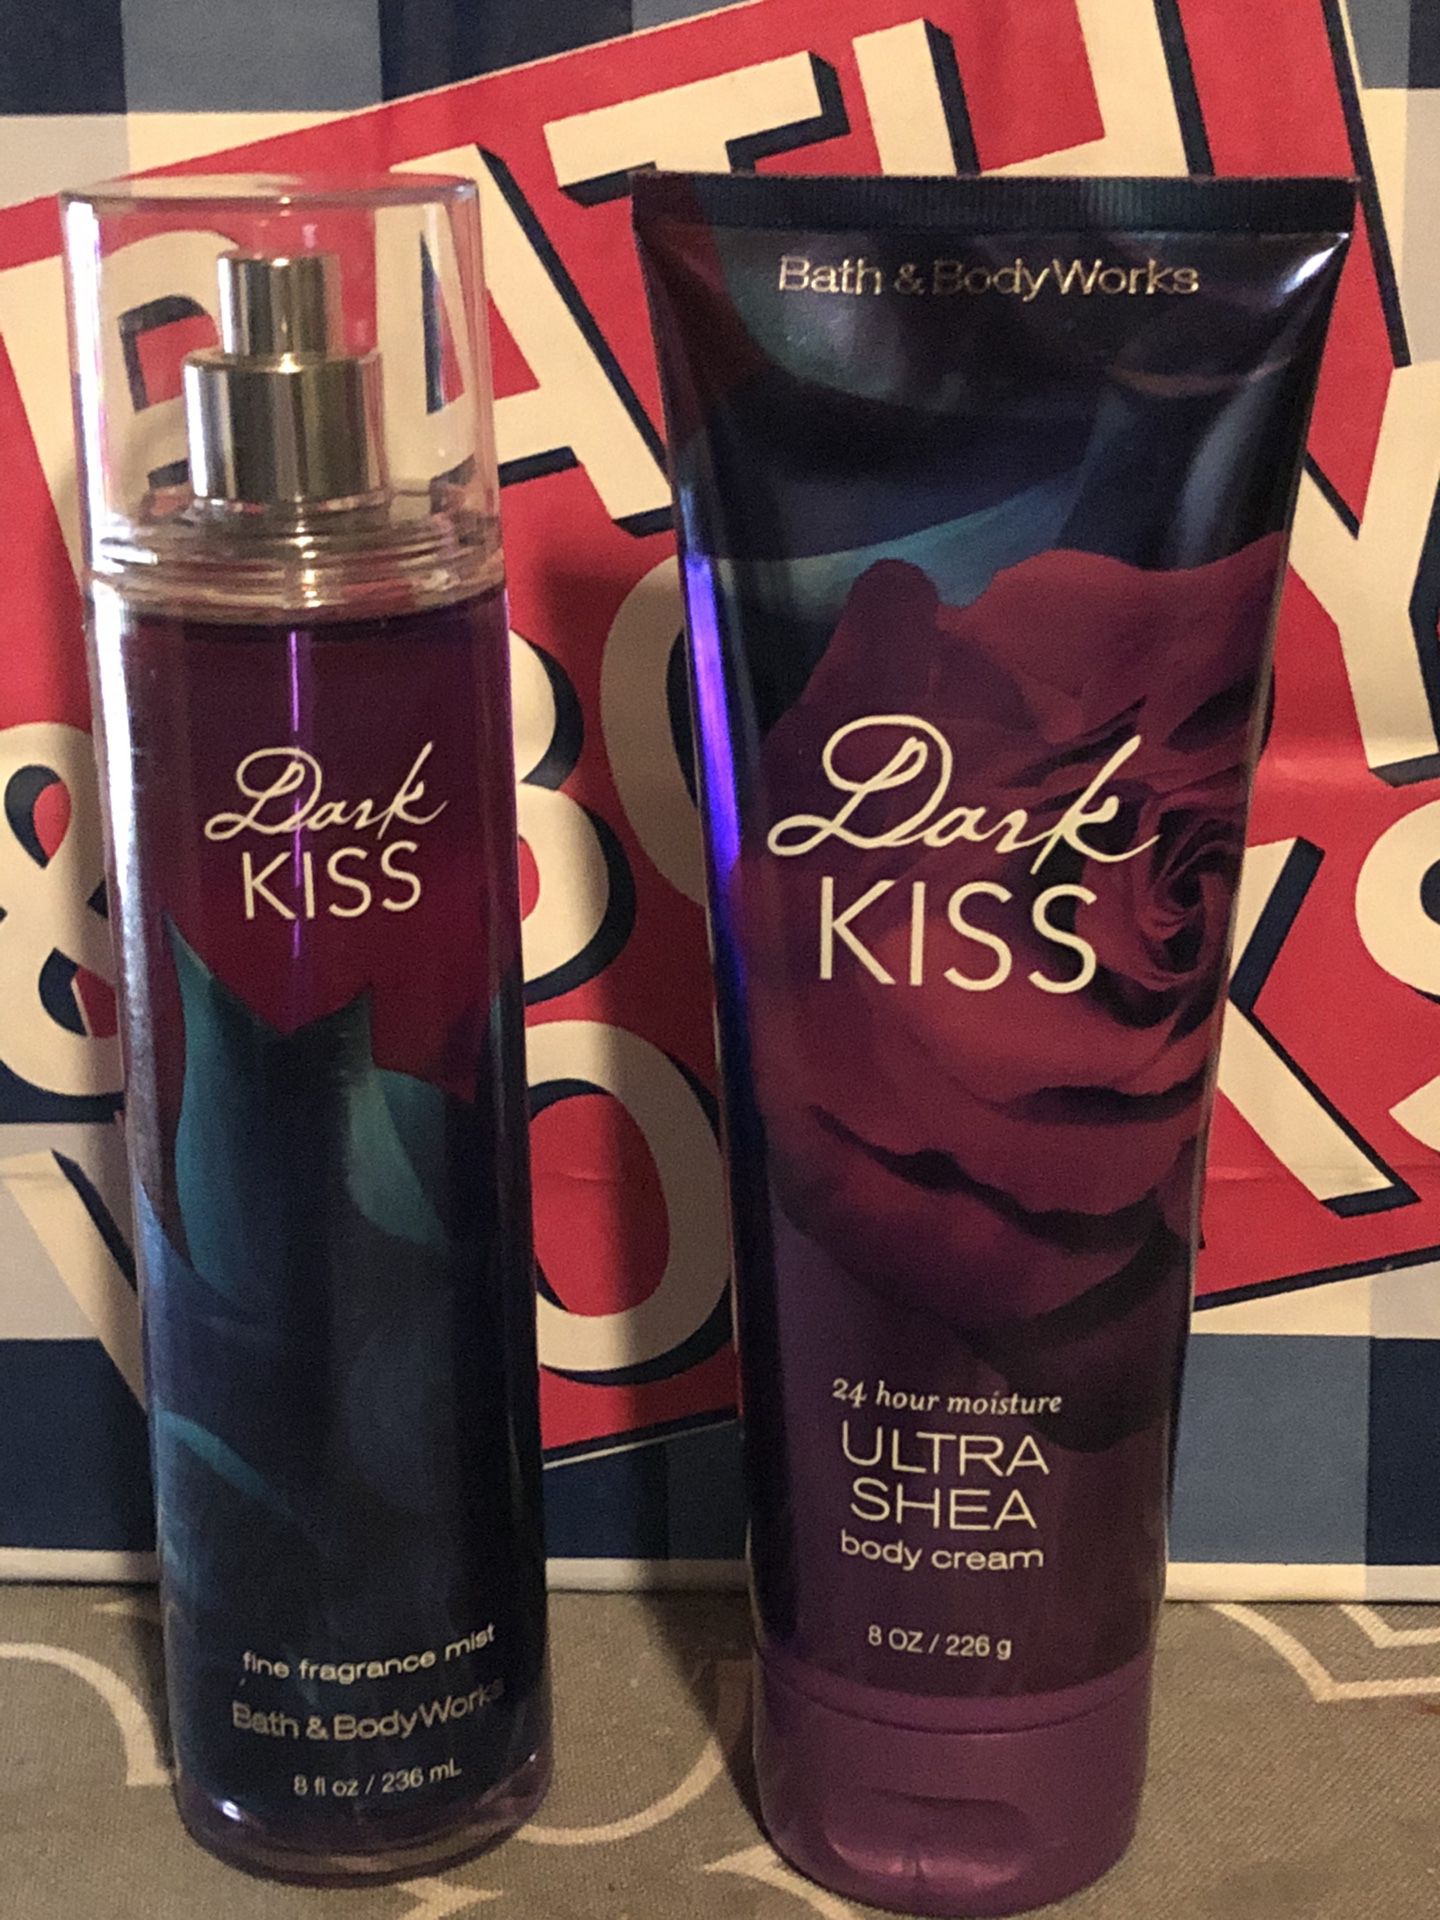 Dark Kiss Fine Fragrance Mist And Ultra Shea Body Cream By Bath And Body Works. Sold As A Set Only. $9.50. See Description For Details.